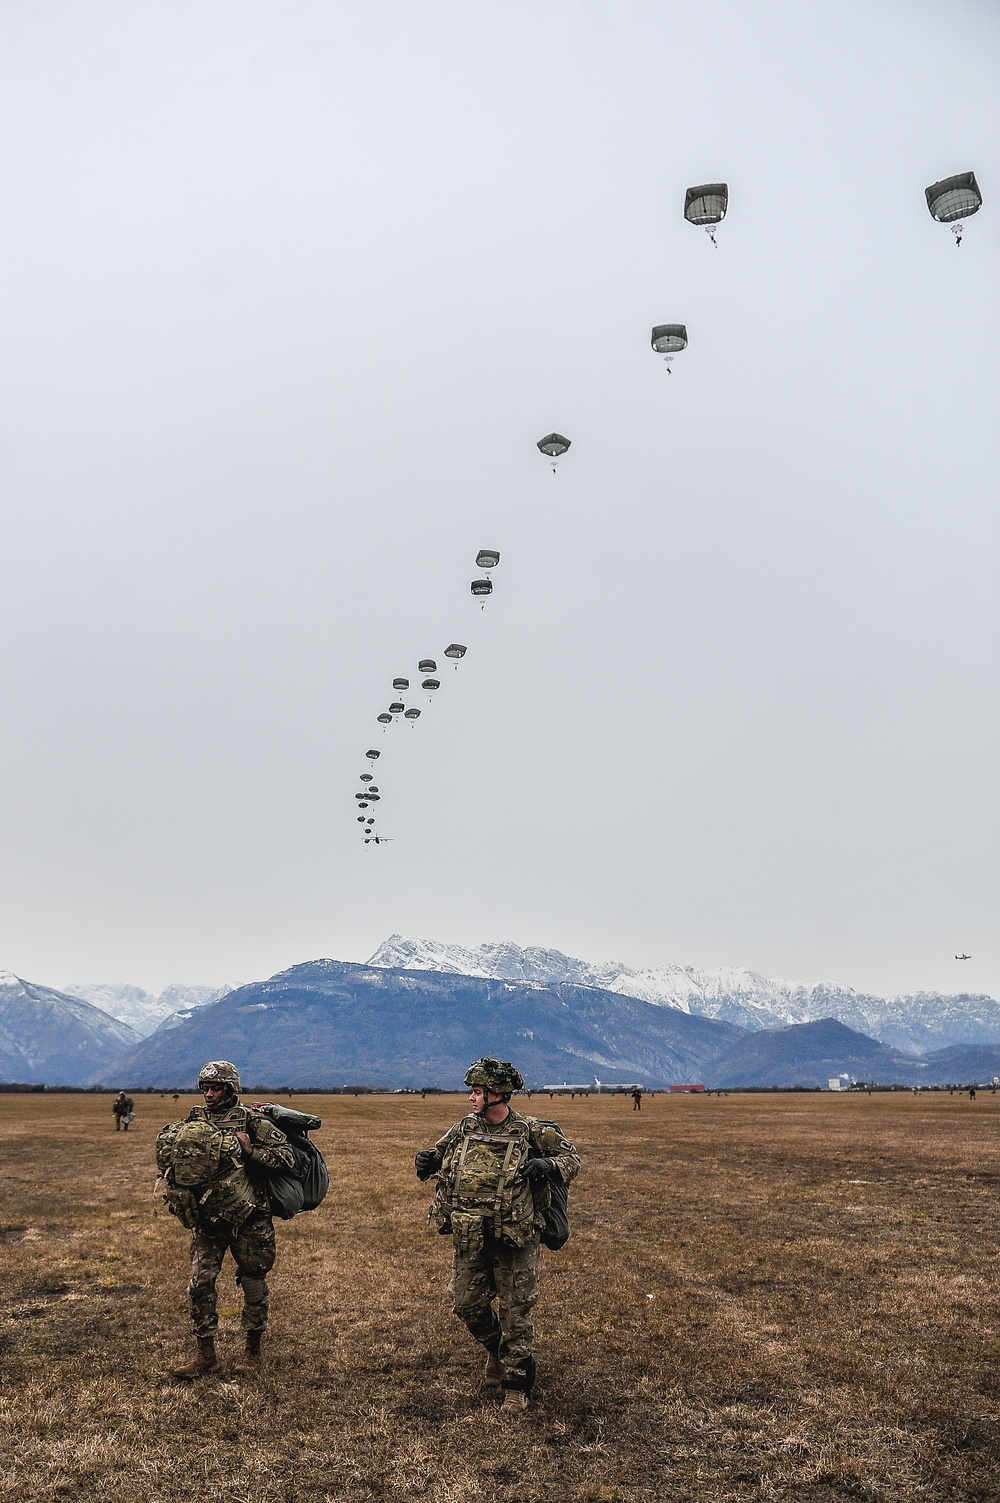 Sky Soldiers get off the drop zone during operation.